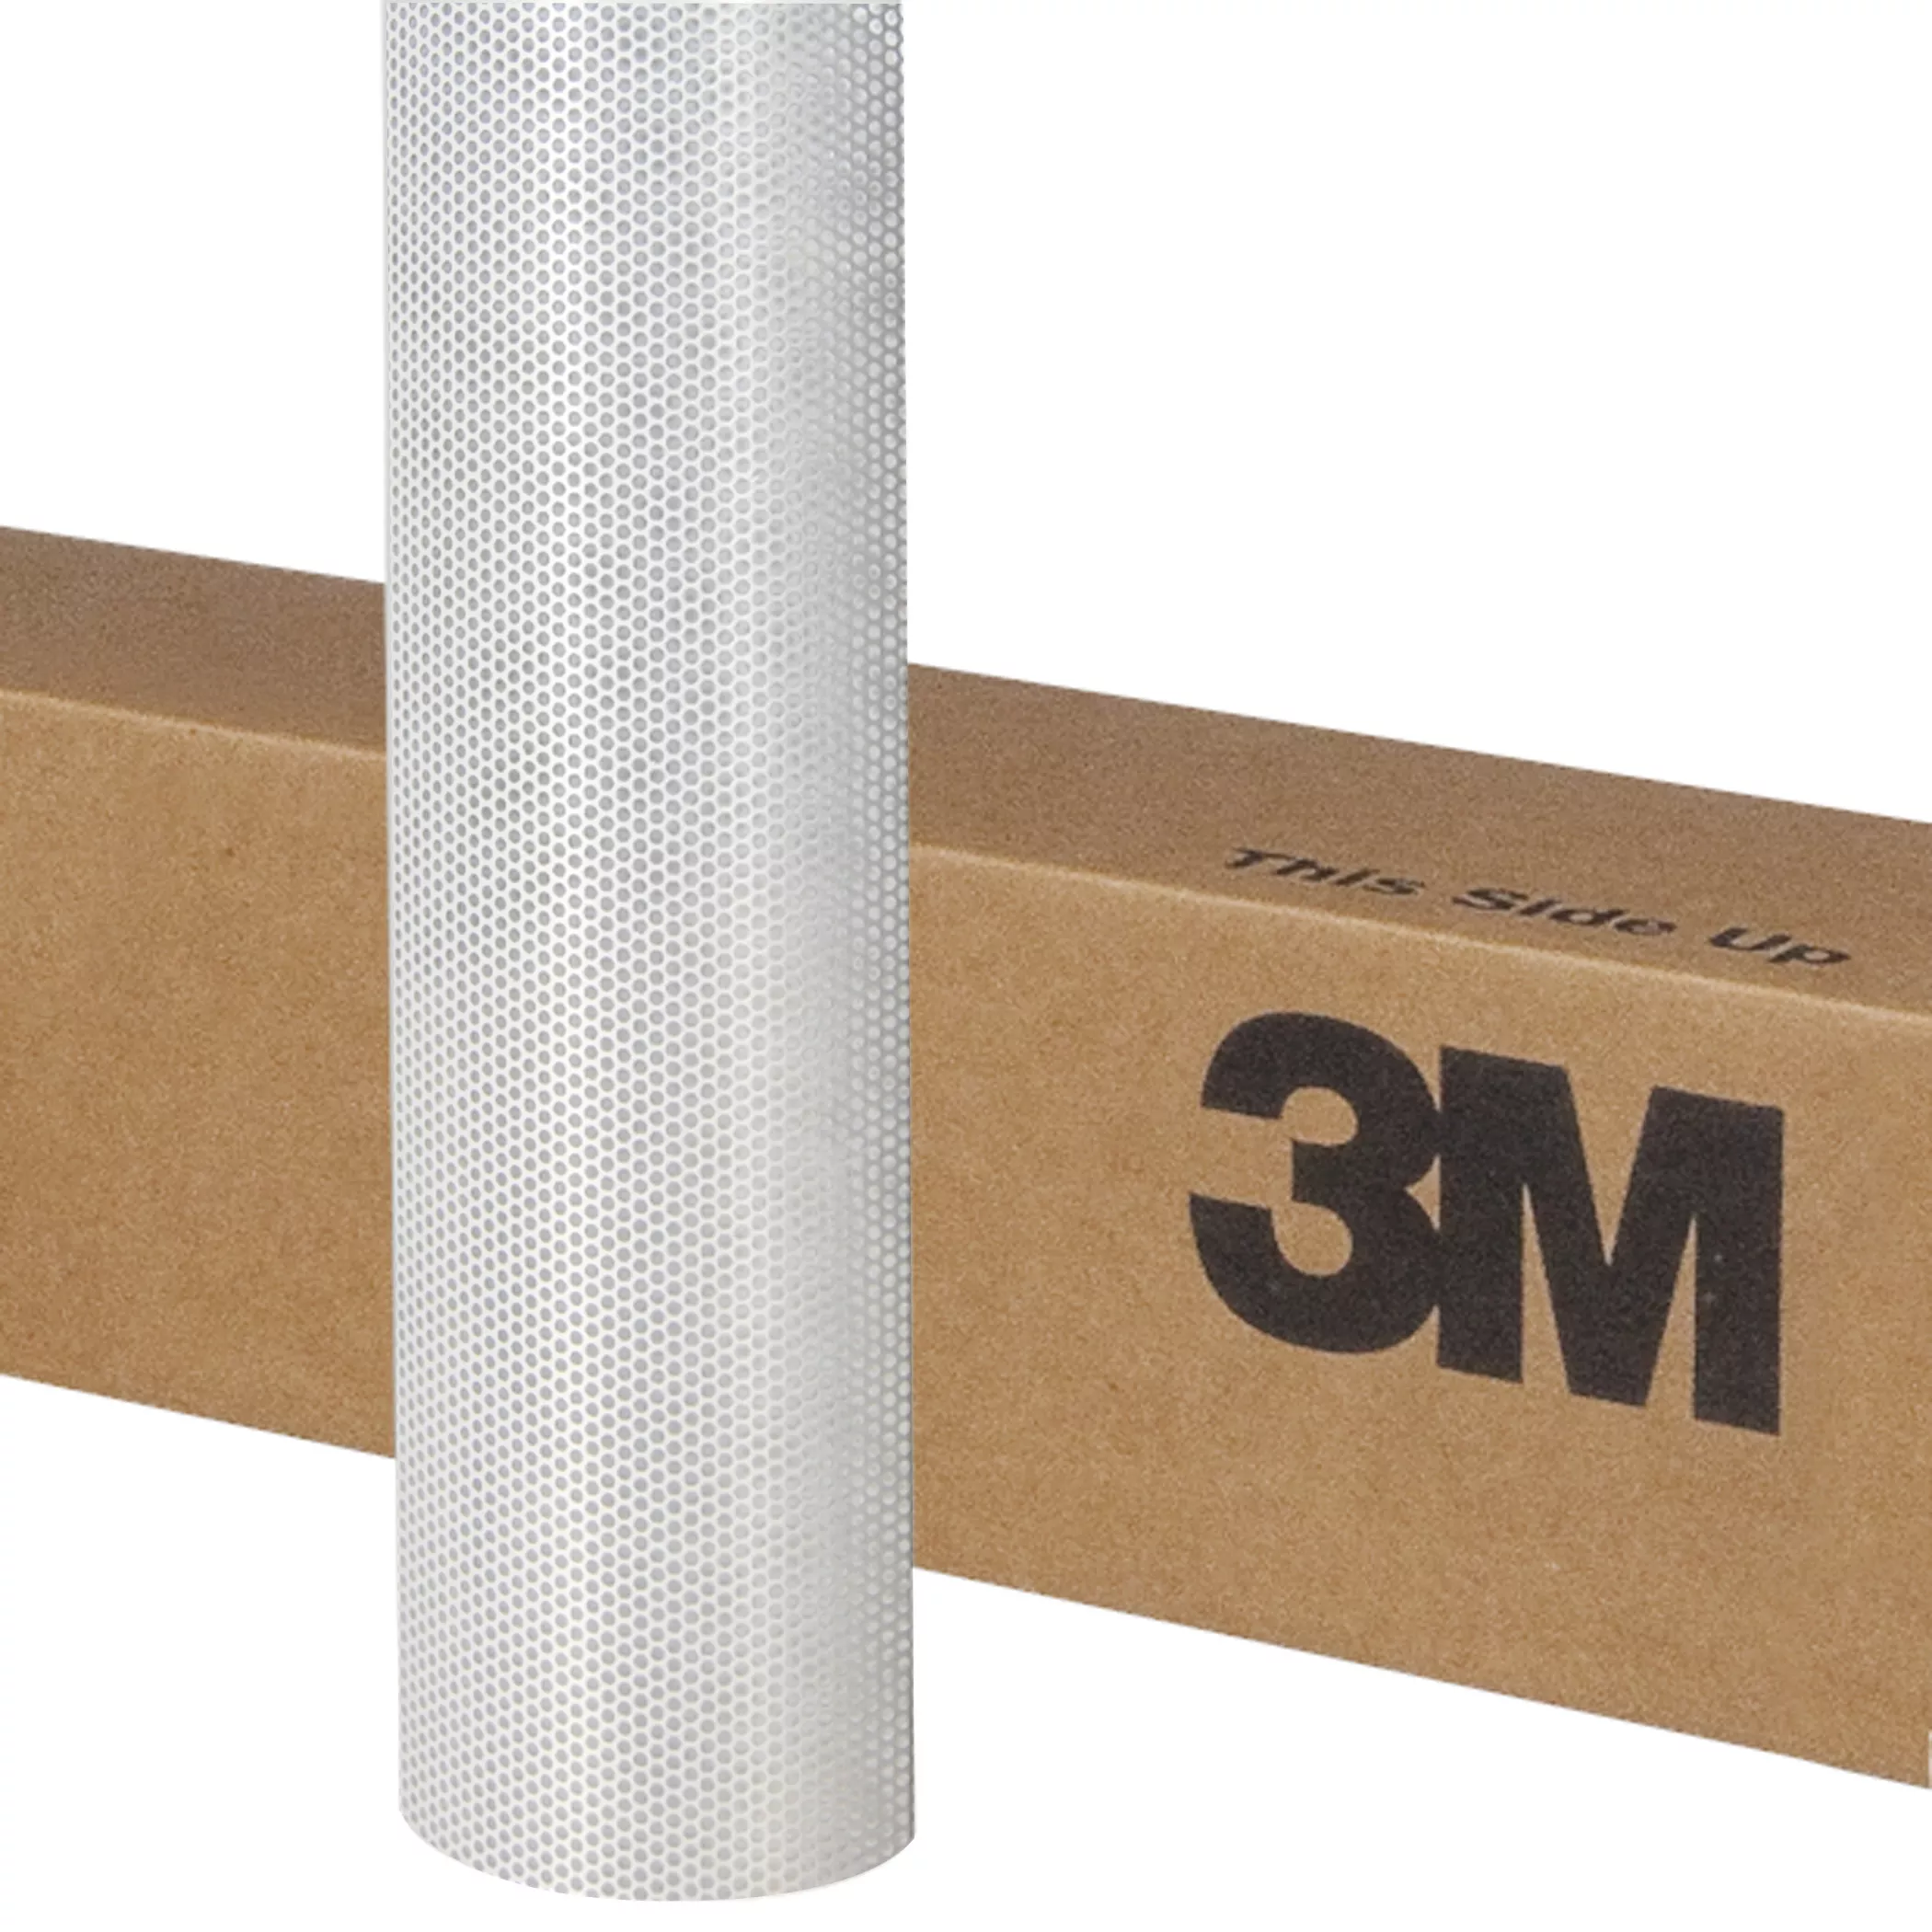 3M™ Perforated Window Graphic Film 8170-P40, White, 54 in x 10 yd